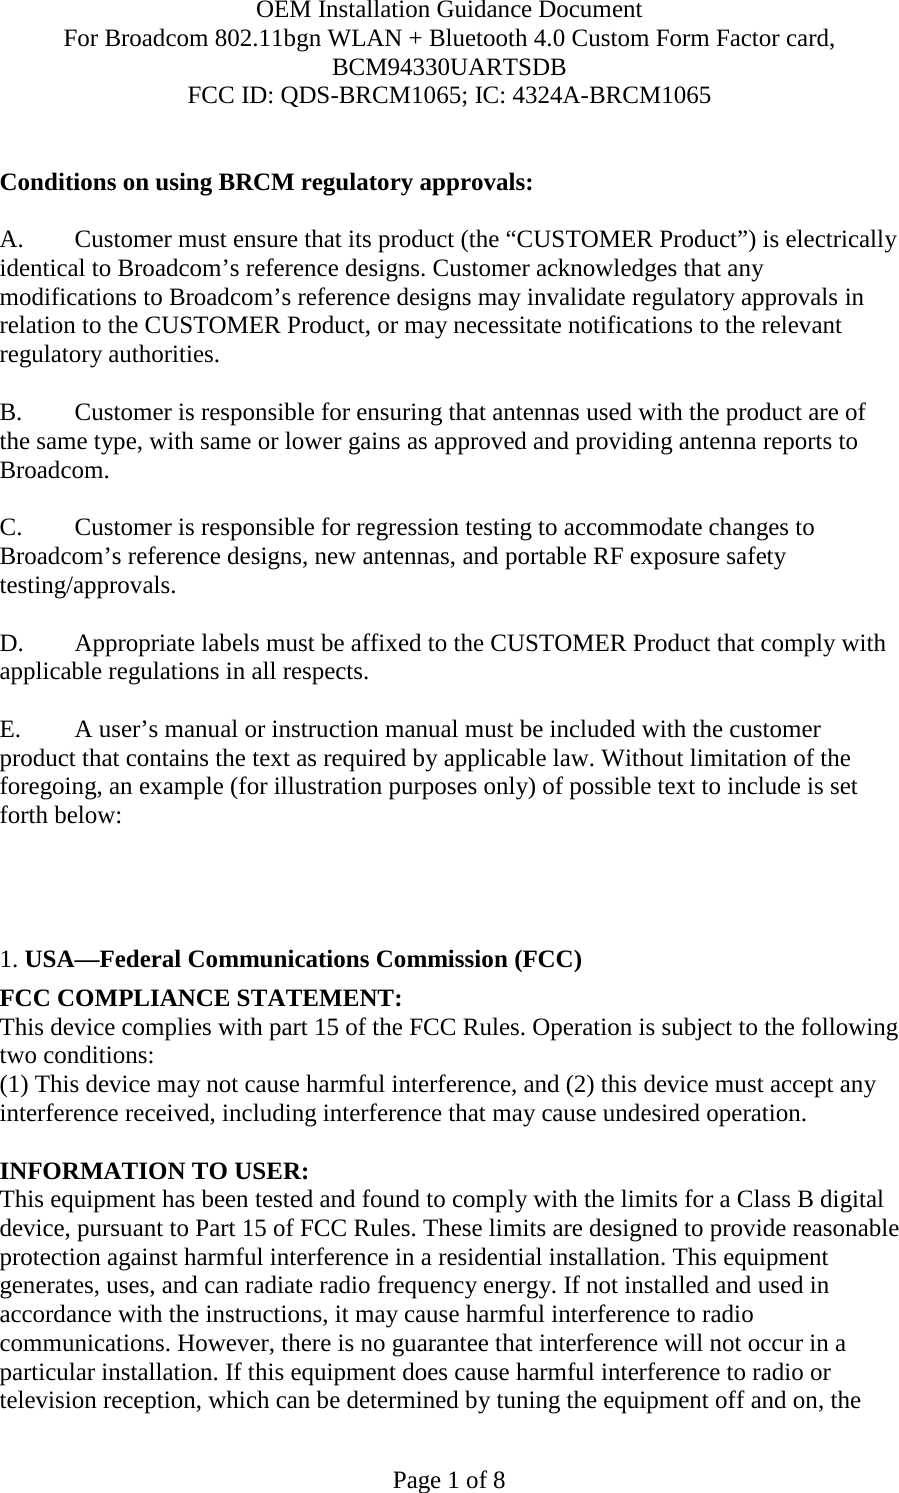 OEM Installation Guidance Document For Broadcom 802.11bgn WLAN + Bluetooth 4.0 Custom Form Factor card, BCM94330UARTSDB FCC ID: QDS-BRCM1065; IC: 4324A-BRCM1065  Page 1 of 8  Conditions on using BRCM regulatory approvals:   A.  Customer must ensure that its product (the “CUSTOMER Product”) is electrically identical to Broadcom’s reference designs. Customer acknowledges that any modifications to Broadcom’s reference designs may invalidate regulatory approvals in relation to the CUSTOMER Product, or may necessitate notifications to the relevant regulatory authorities.  B.   Customer is responsible for ensuring that antennas used with the product are of the same type, with same or lower gains as approved and providing antenna reports to Broadcom.  C.   Customer is responsible for regression testing to accommodate changes to Broadcom’s reference designs, new antennas, and portable RF exposure safety testing/approvals.  D.  Appropriate labels must be affixed to the CUSTOMER Product that comply with applicable regulations in all respects.    E.  A user’s manual or instruction manual must be included with the customer product that contains the text as required by applicable law. Without limitation of the foregoing, an example (for illustration purposes only) of possible text to include is set forth below:       1. USA—Federal Communications Commission (FCC) FCC COMPLIANCE STATEMENT: This device complies with part 15 of the FCC Rules. Operation is subject to the following two conditions: (1) This device may not cause harmful interference, and (2) this device must accept any interference received, including interference that may cause undesired operation.  INFORMATION TO USER: This equipment has been tested and found to comply with the limits for a Class B digital device, pursuant to Part 15 of FCC Rules. These limits are designed to provide reasonable protection against harmful interference in a residential installation. This equipment generates, uses, and can radiate radio frequency energy. If not installed and used in accordance with the instructions, it may cause harmful interference to radio communications. However, there is no guarantee that interference will not occur in a particular installation. If this equipment does cause harmful interference to radio or television reception, which can be determined by tuning the equipment off and on, the 